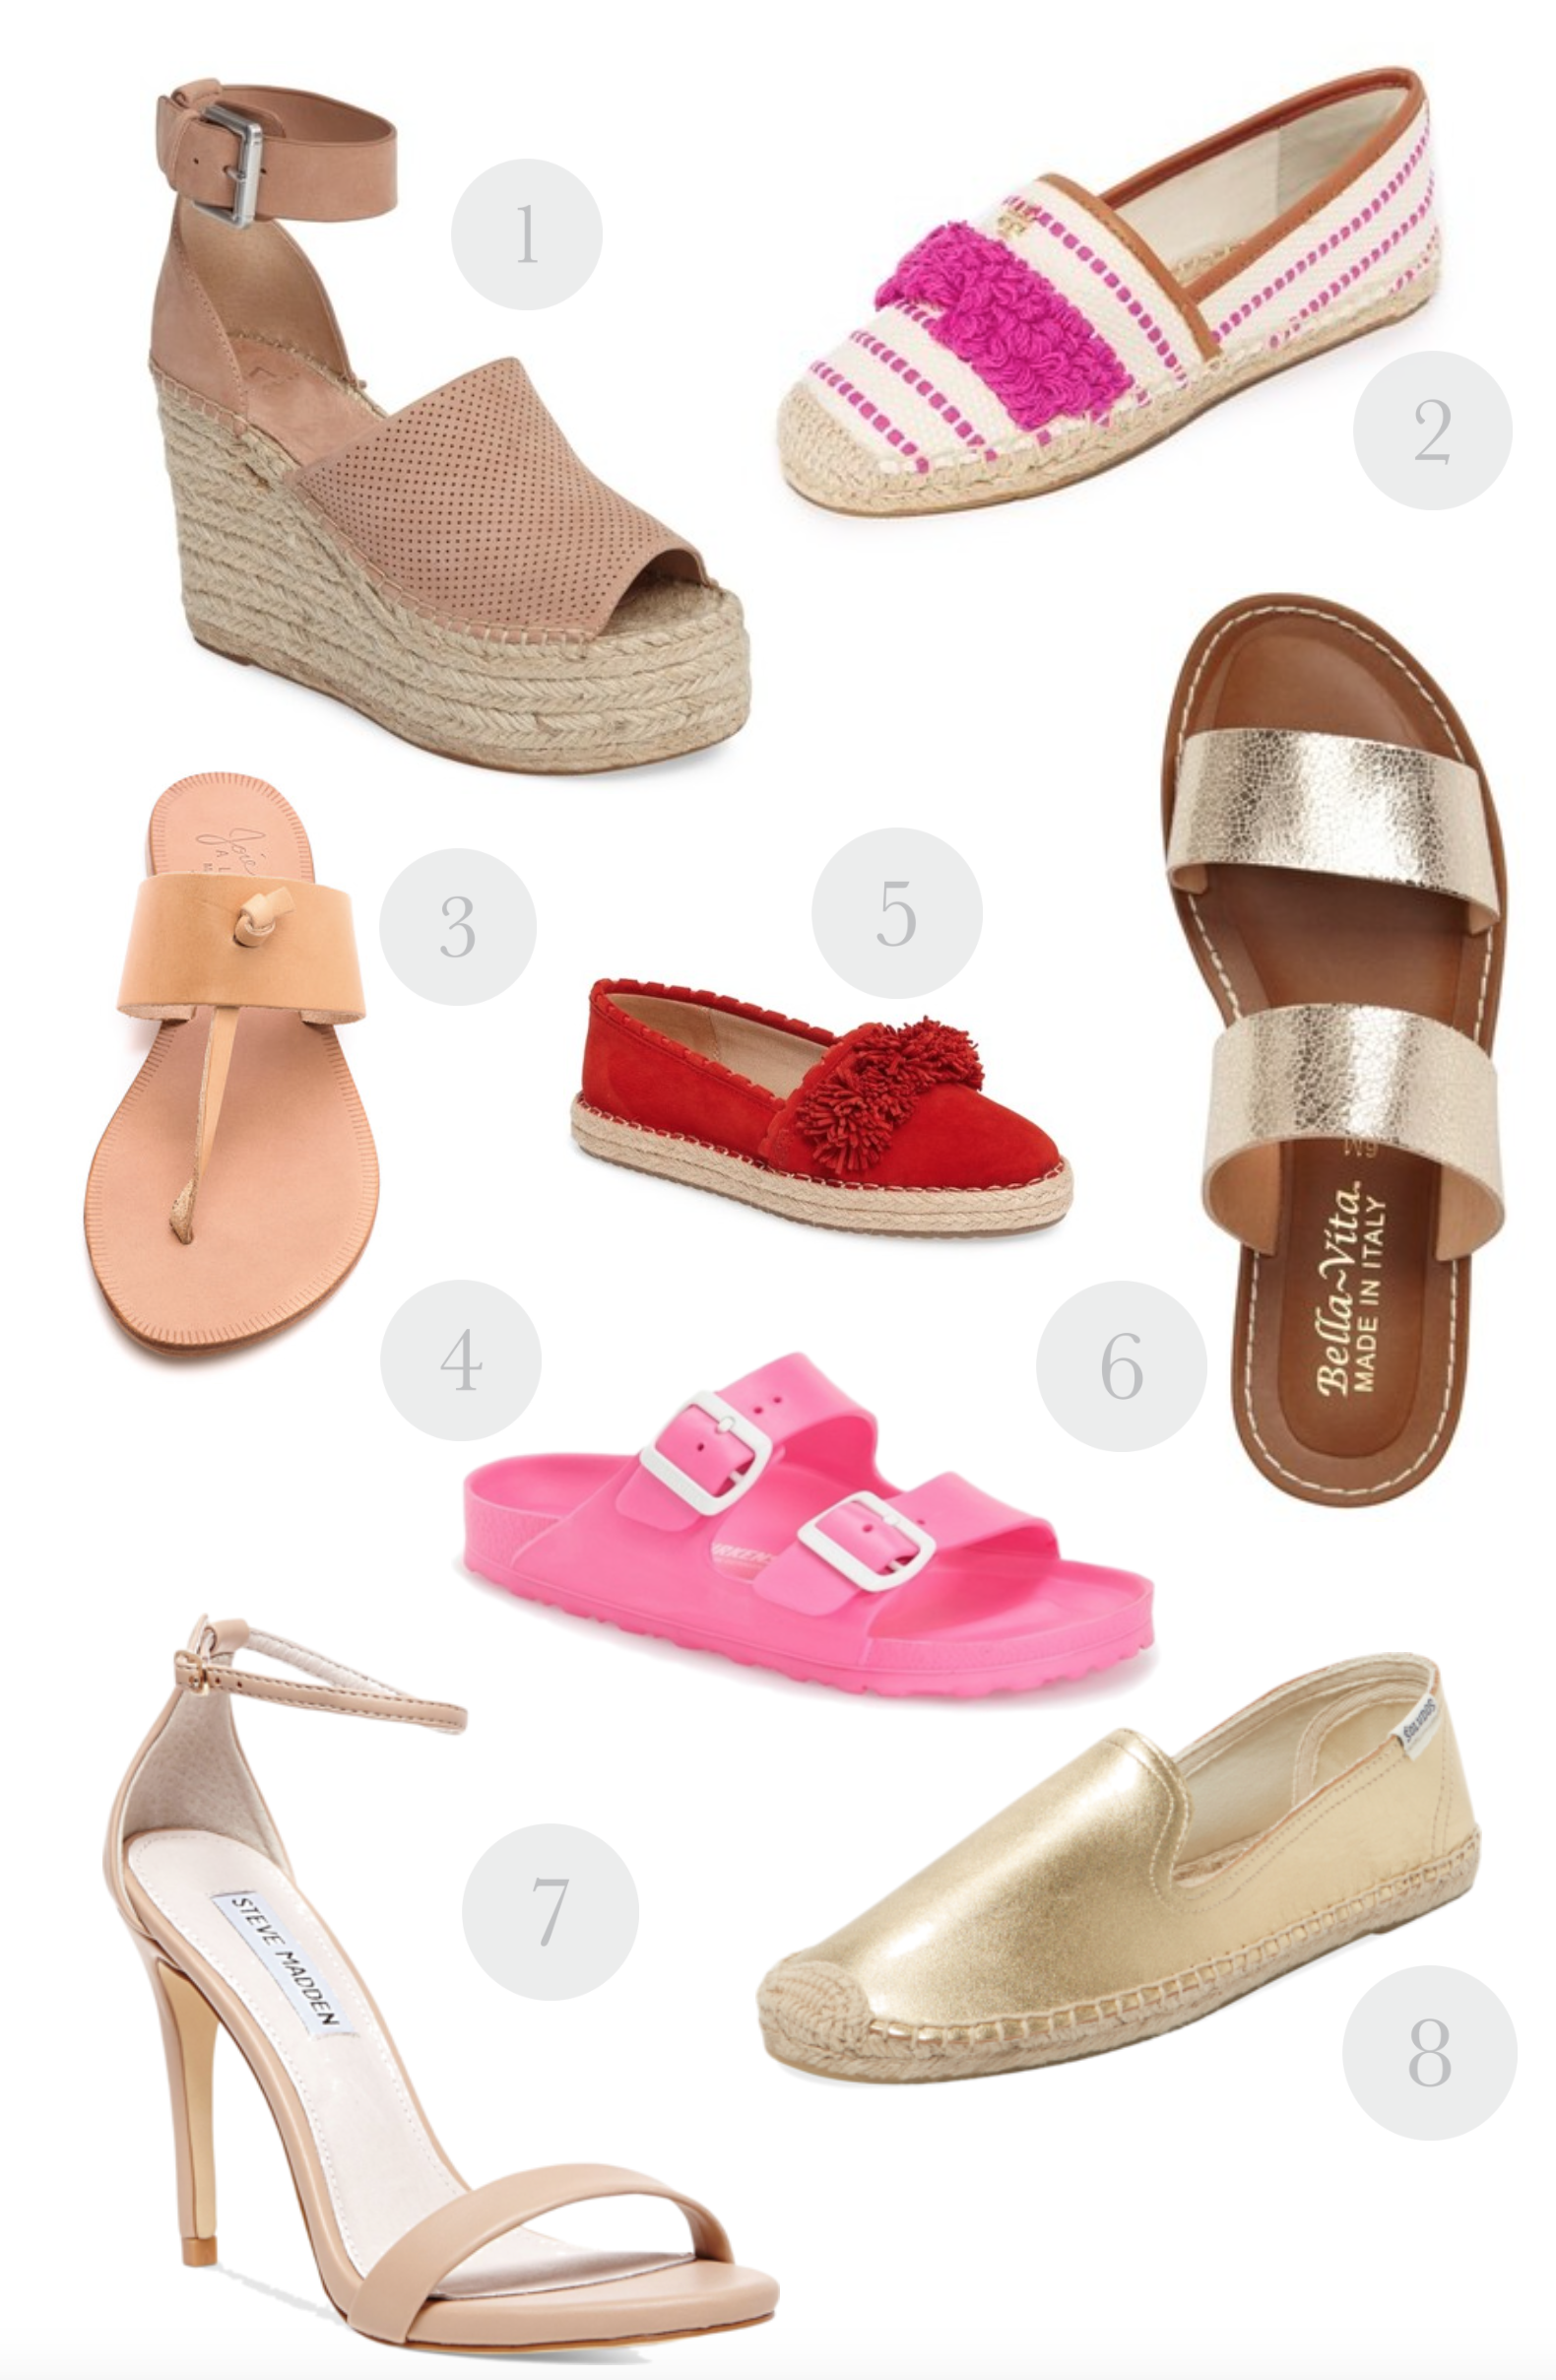 Summer Shoes I Can't Stop Thinking About